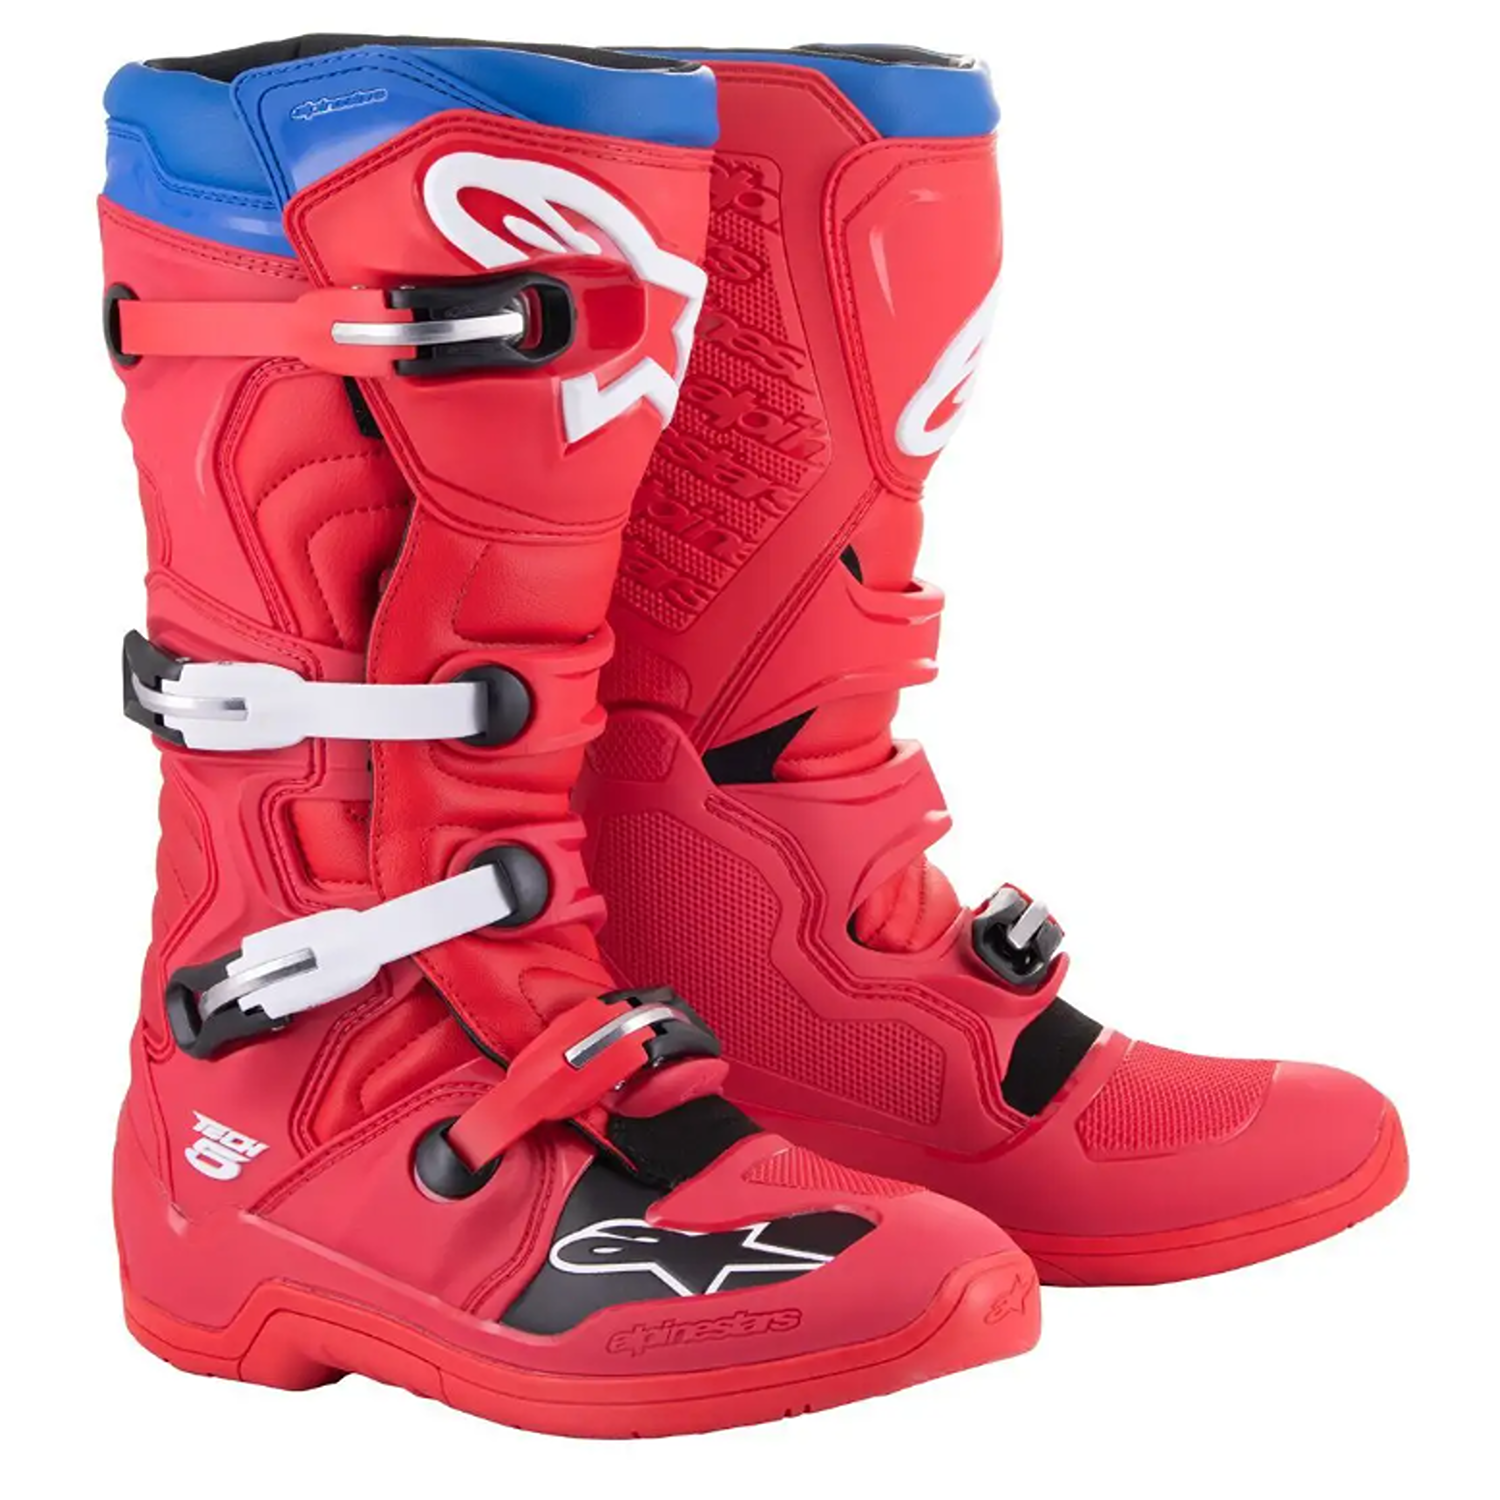 Image of Alpinestars Tech 5 Boots Bright Red Dark Red Blue Taille US 13